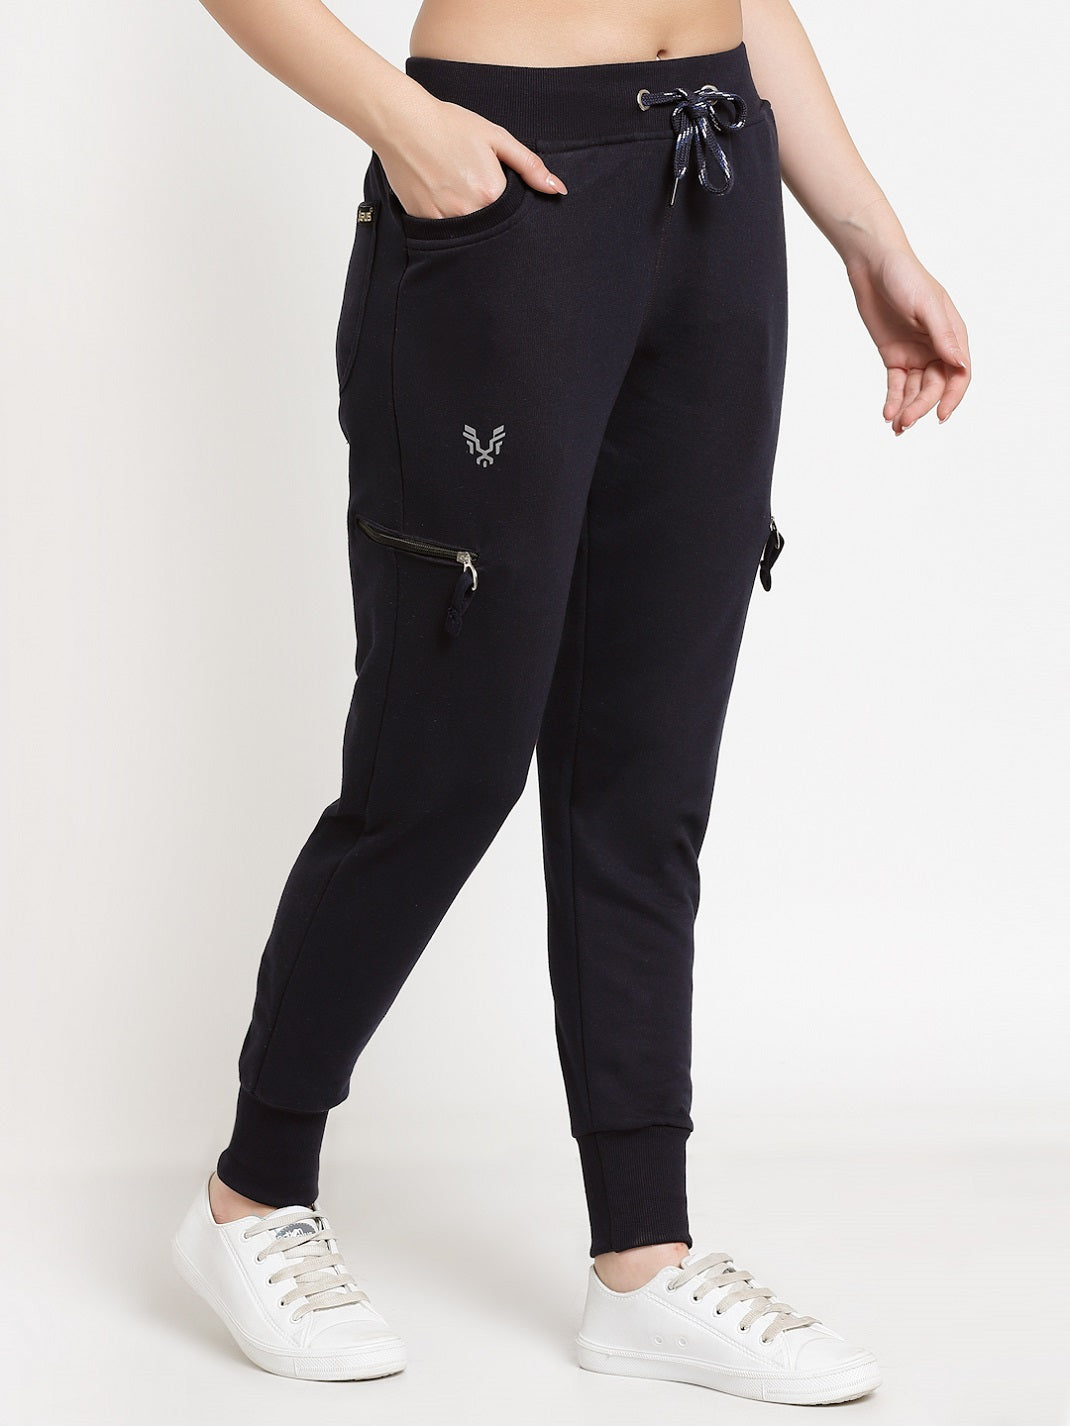 Volleyball jogging pants  Volleyball sweatpants, Volleyball